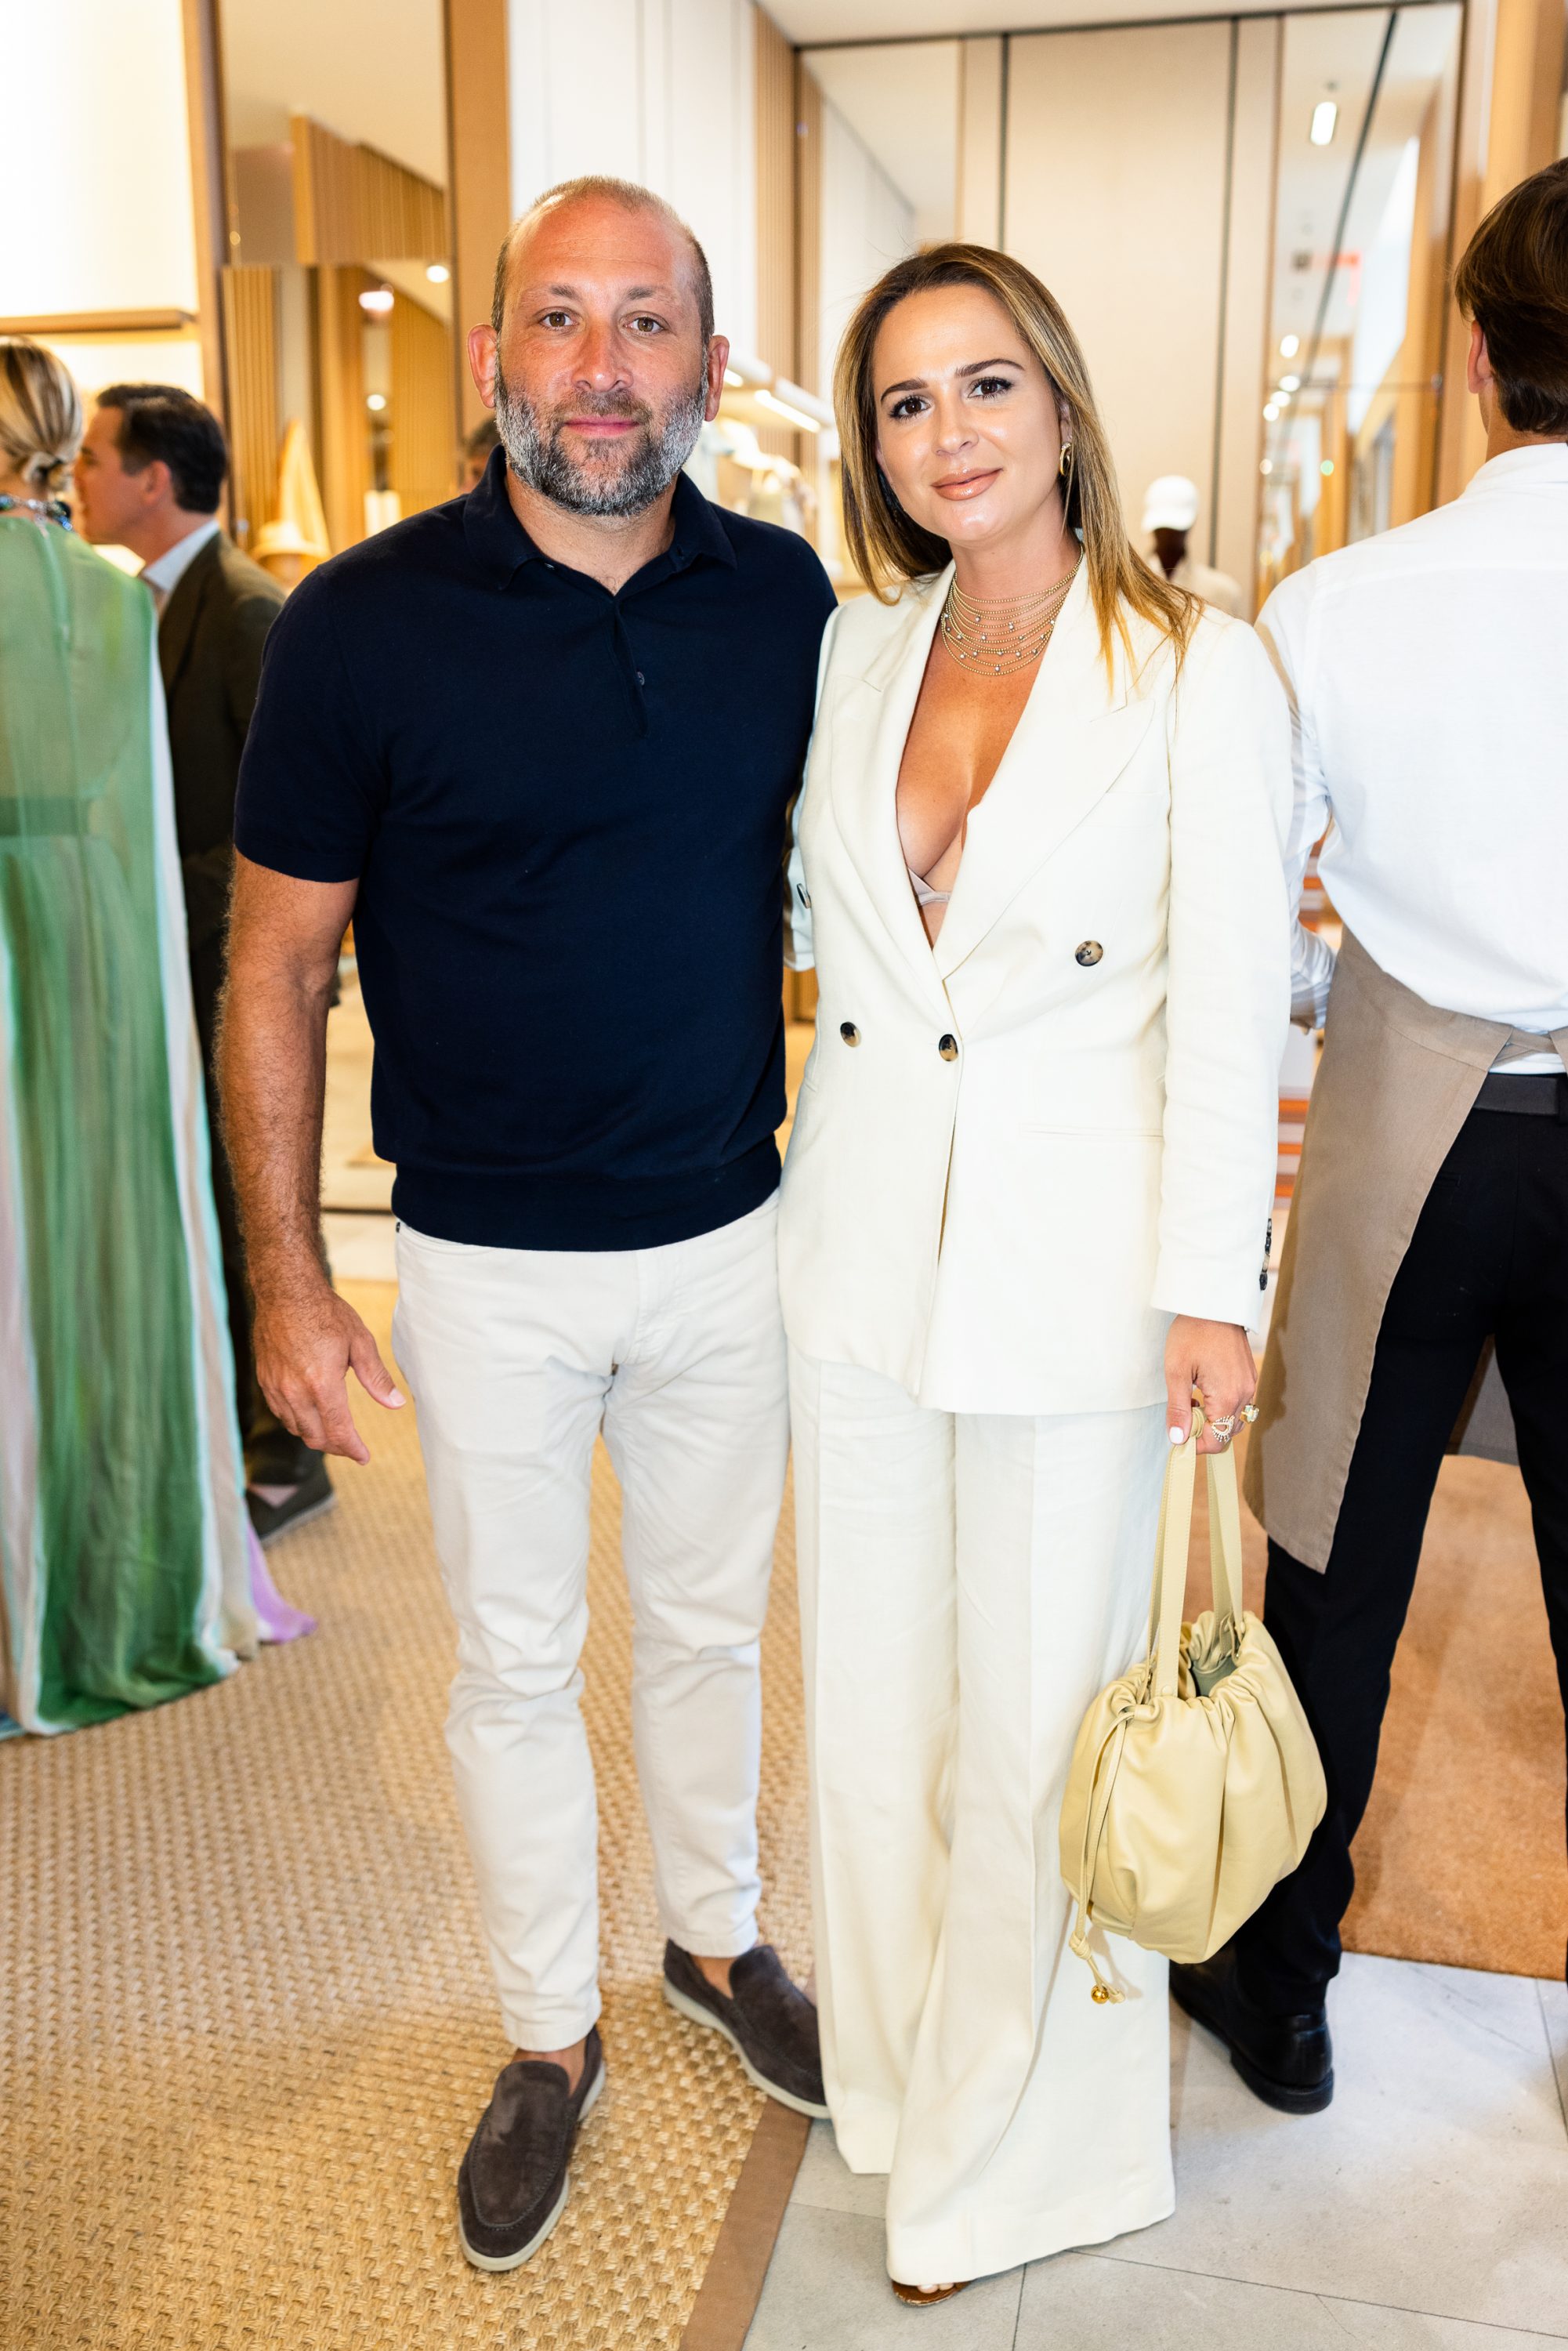 Loro Piana Celebrates the Launch of the Resort 2023 Collection in